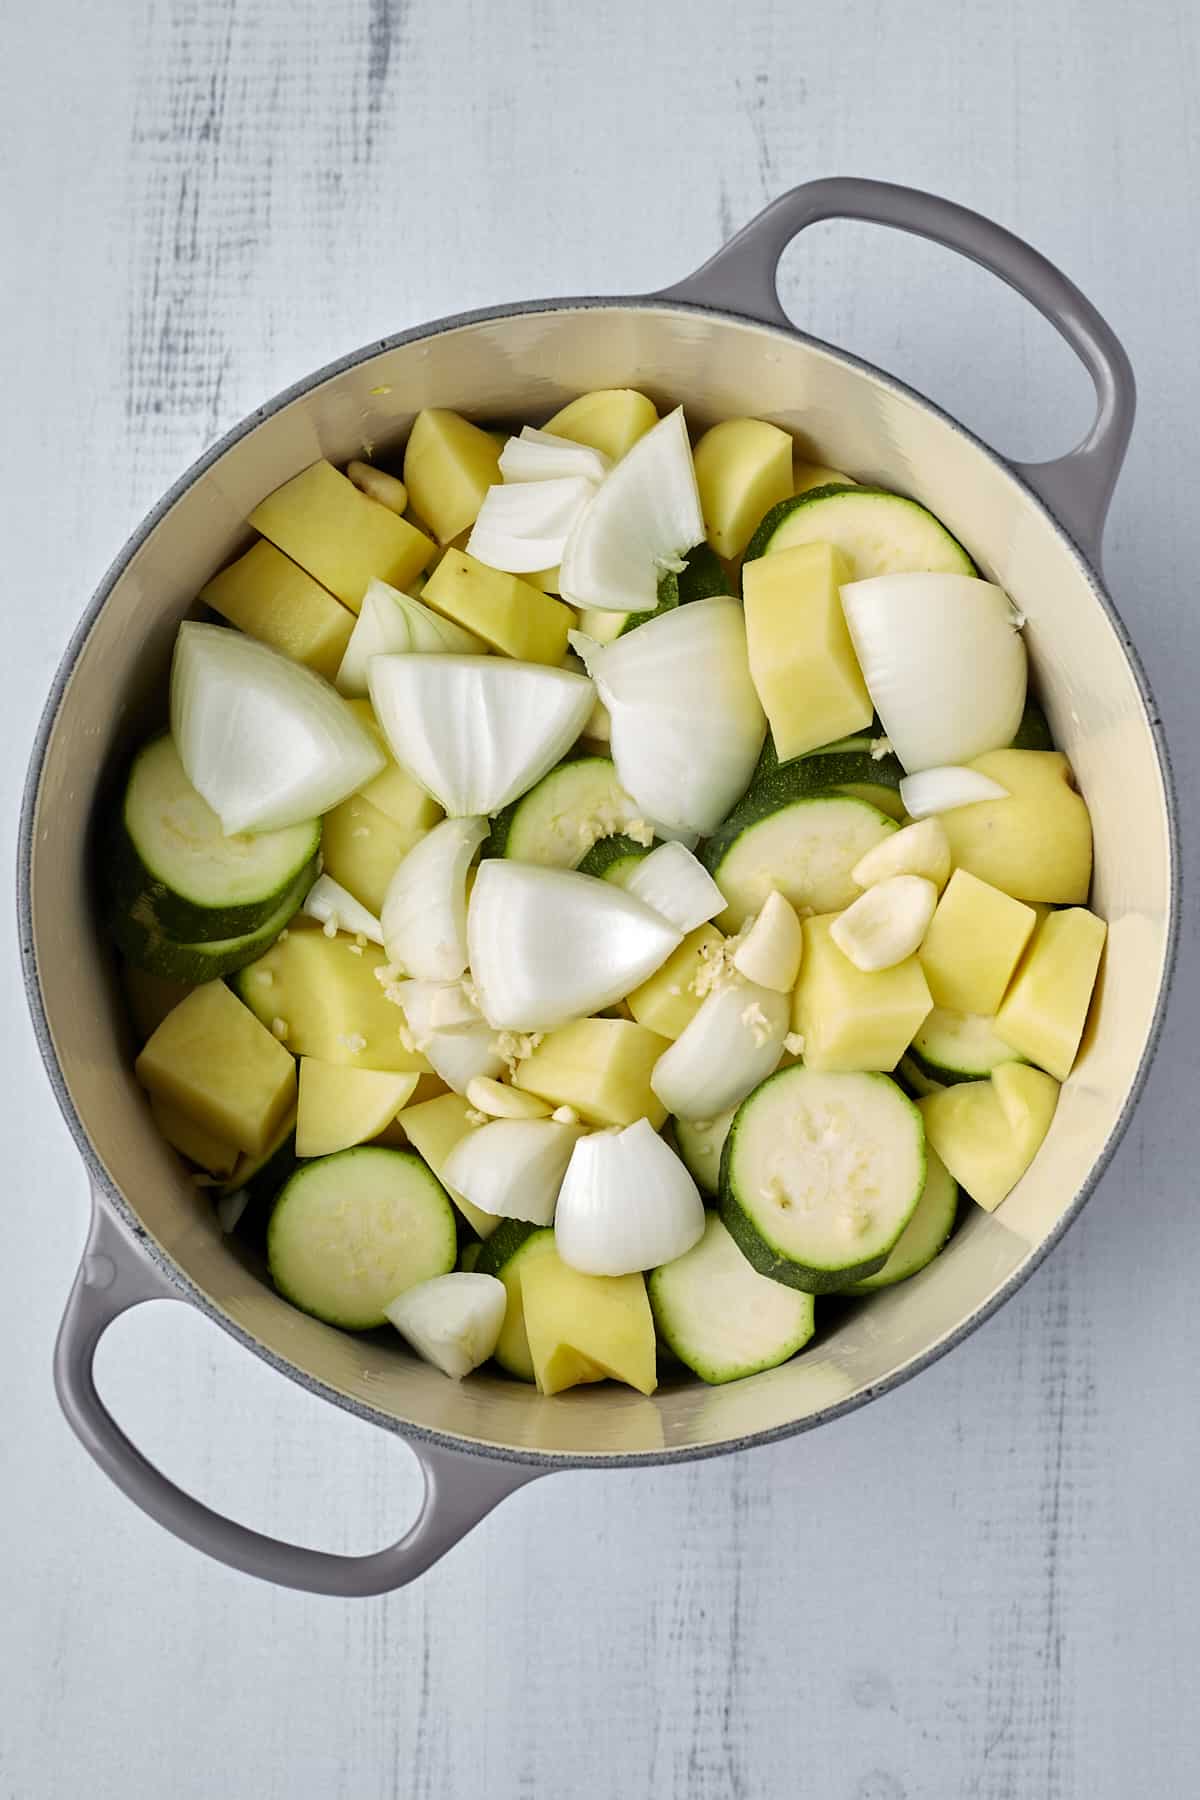 onions, zucchini, potatoes, and garlic in a large pot